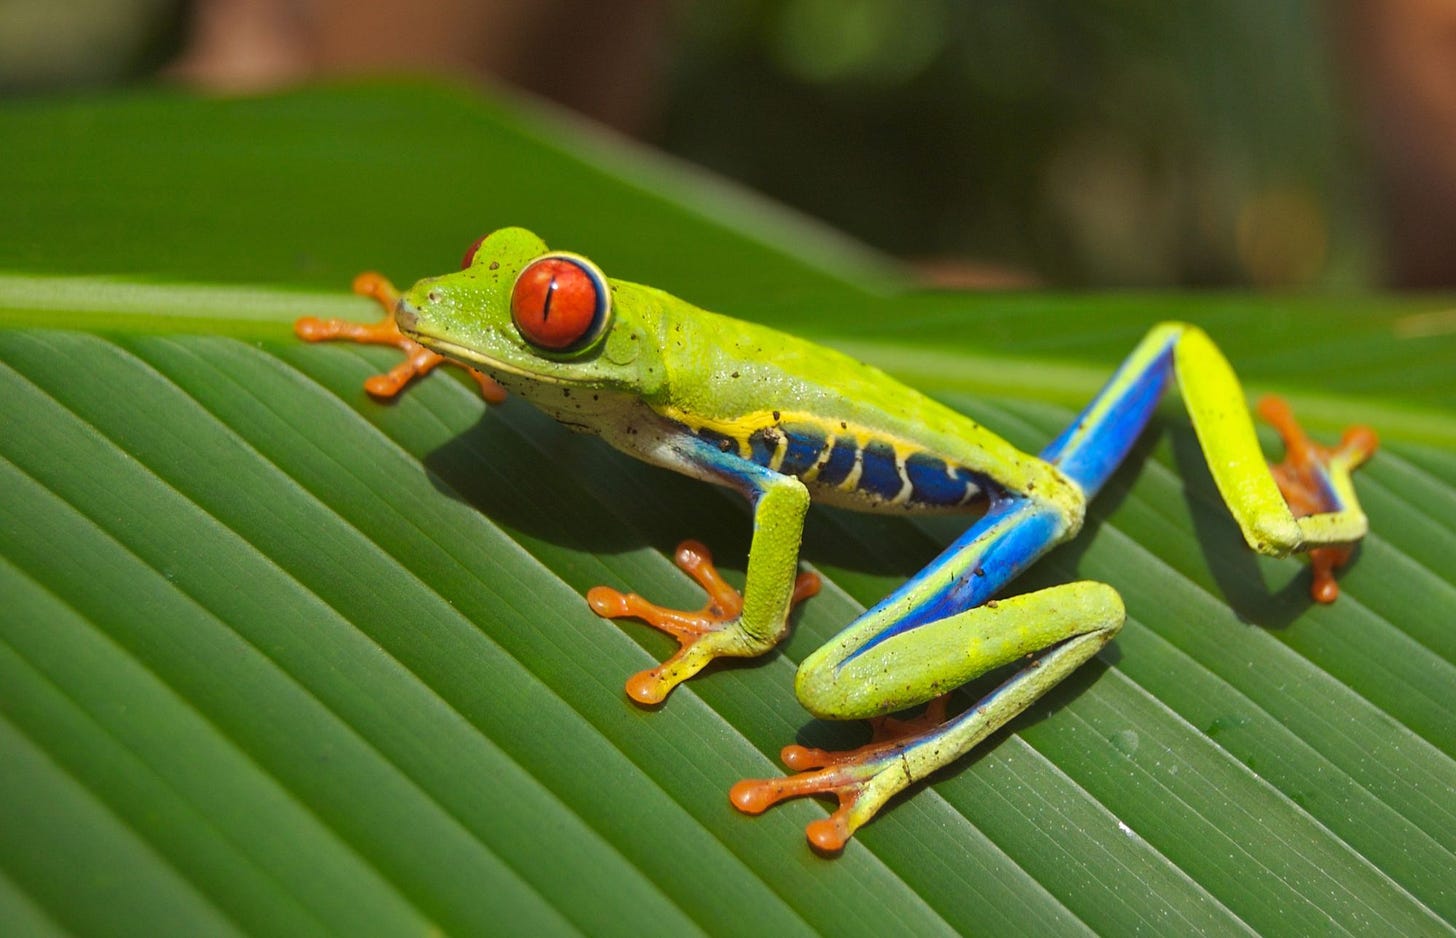 The red-eyed tree frog of Costa Rica